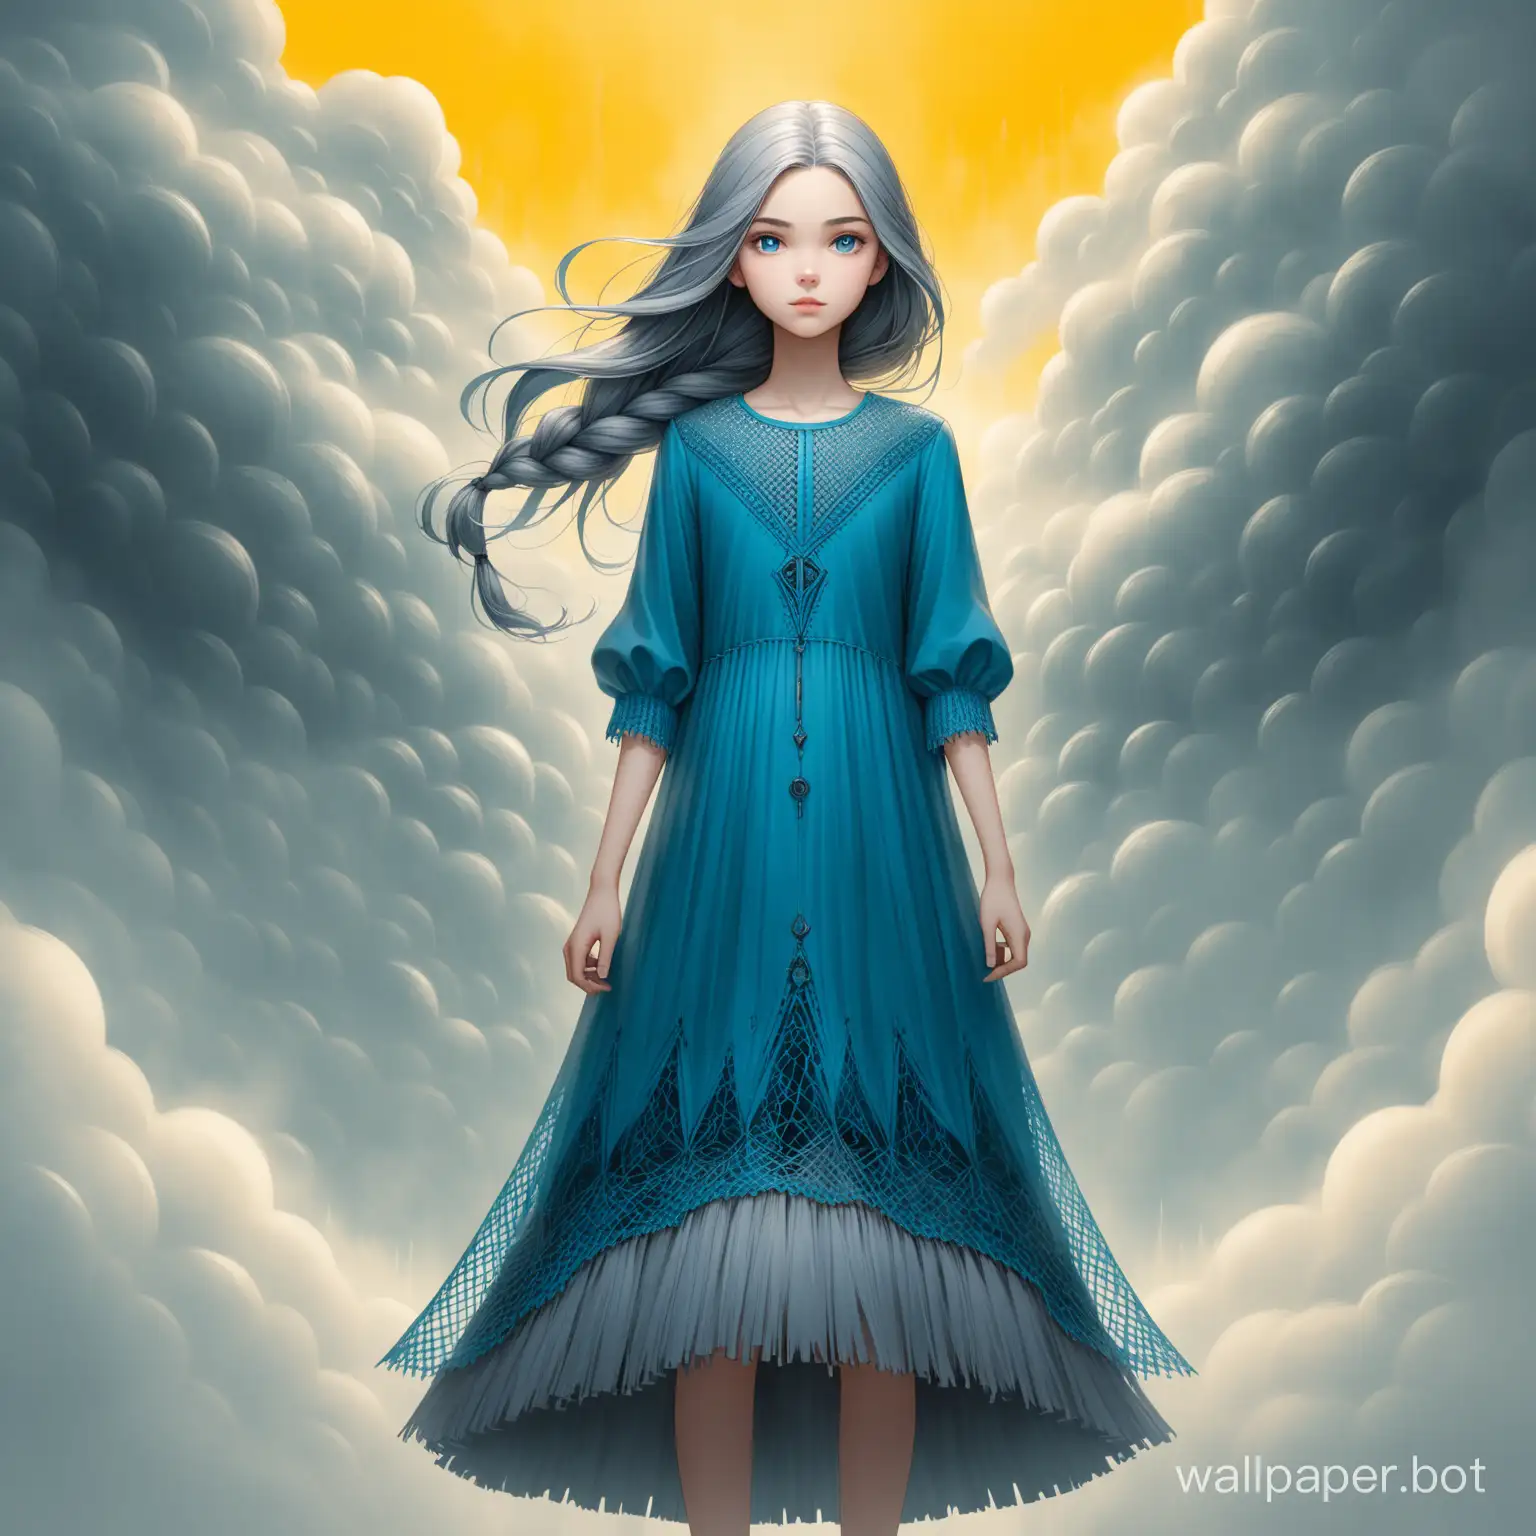 Gabriel Pacheco style, atmosphere yellow background in a foggy cloud, (close ap!)  girl 15 years old,  clear blue eyes, big gray hair braided, long loose dress with sewing at the bottom, intricate details, octane, bright 3D illustration, clear, bold brush strokes, height - 3/4